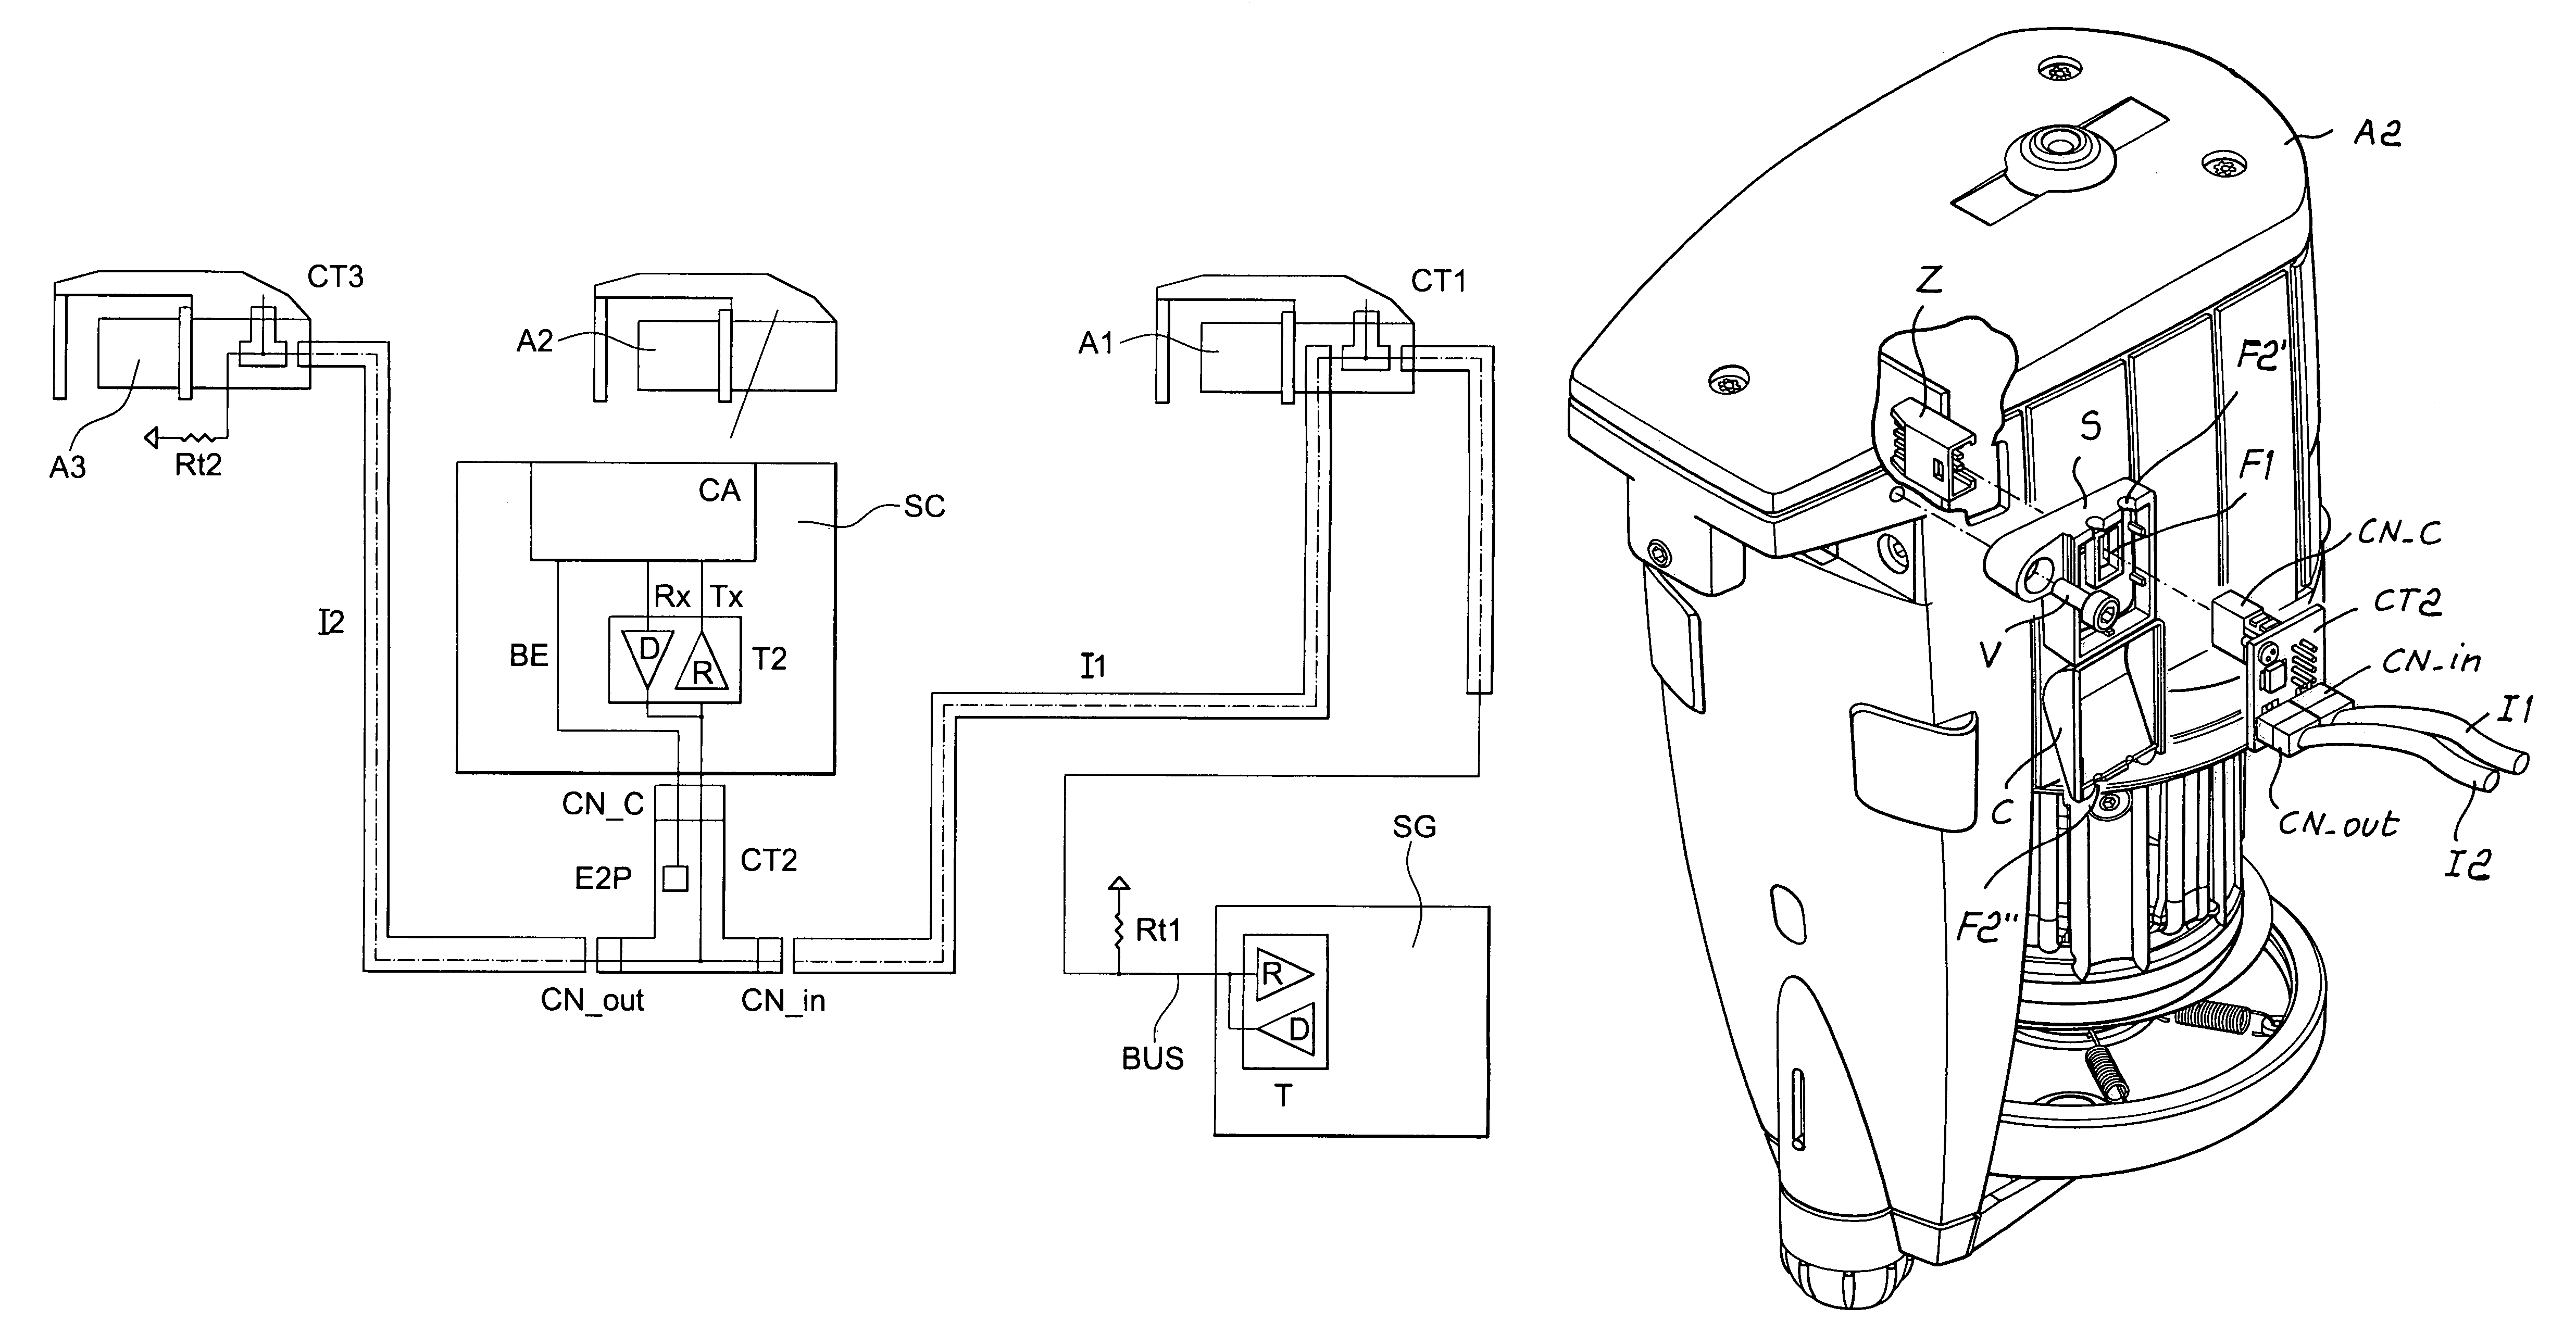 Three-way connector for connecting weft feeders of textile machines to a serial bus, and a control system based thereon